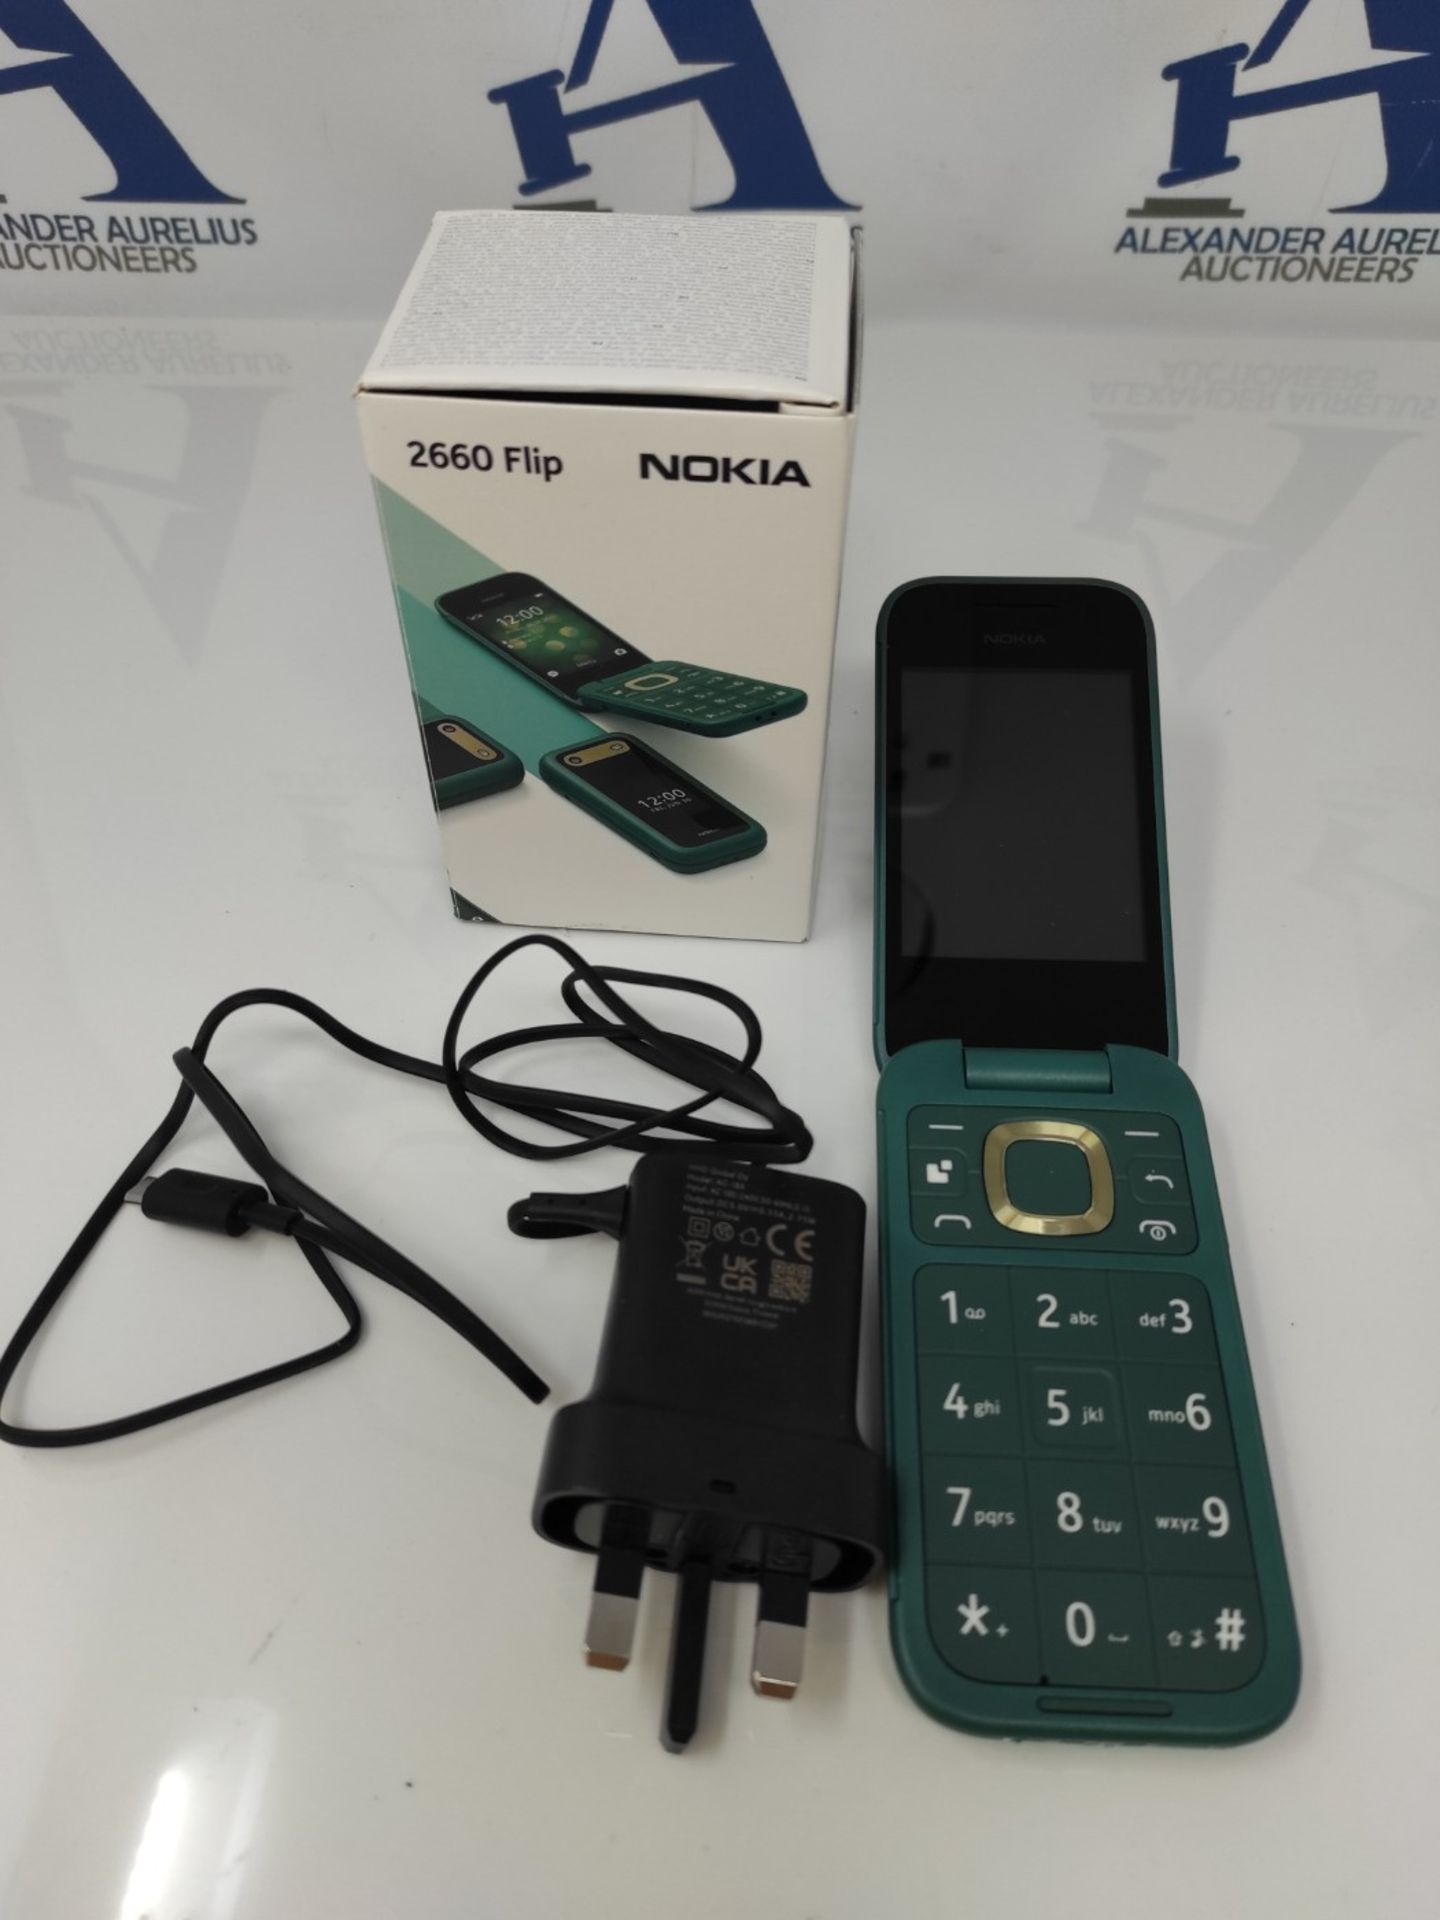 RRP £64.00 Nokia 2660 Flip Feature Phone with 2.8" display, 4G Connectivity, built-in camera, MP3 - Image 2 of 2